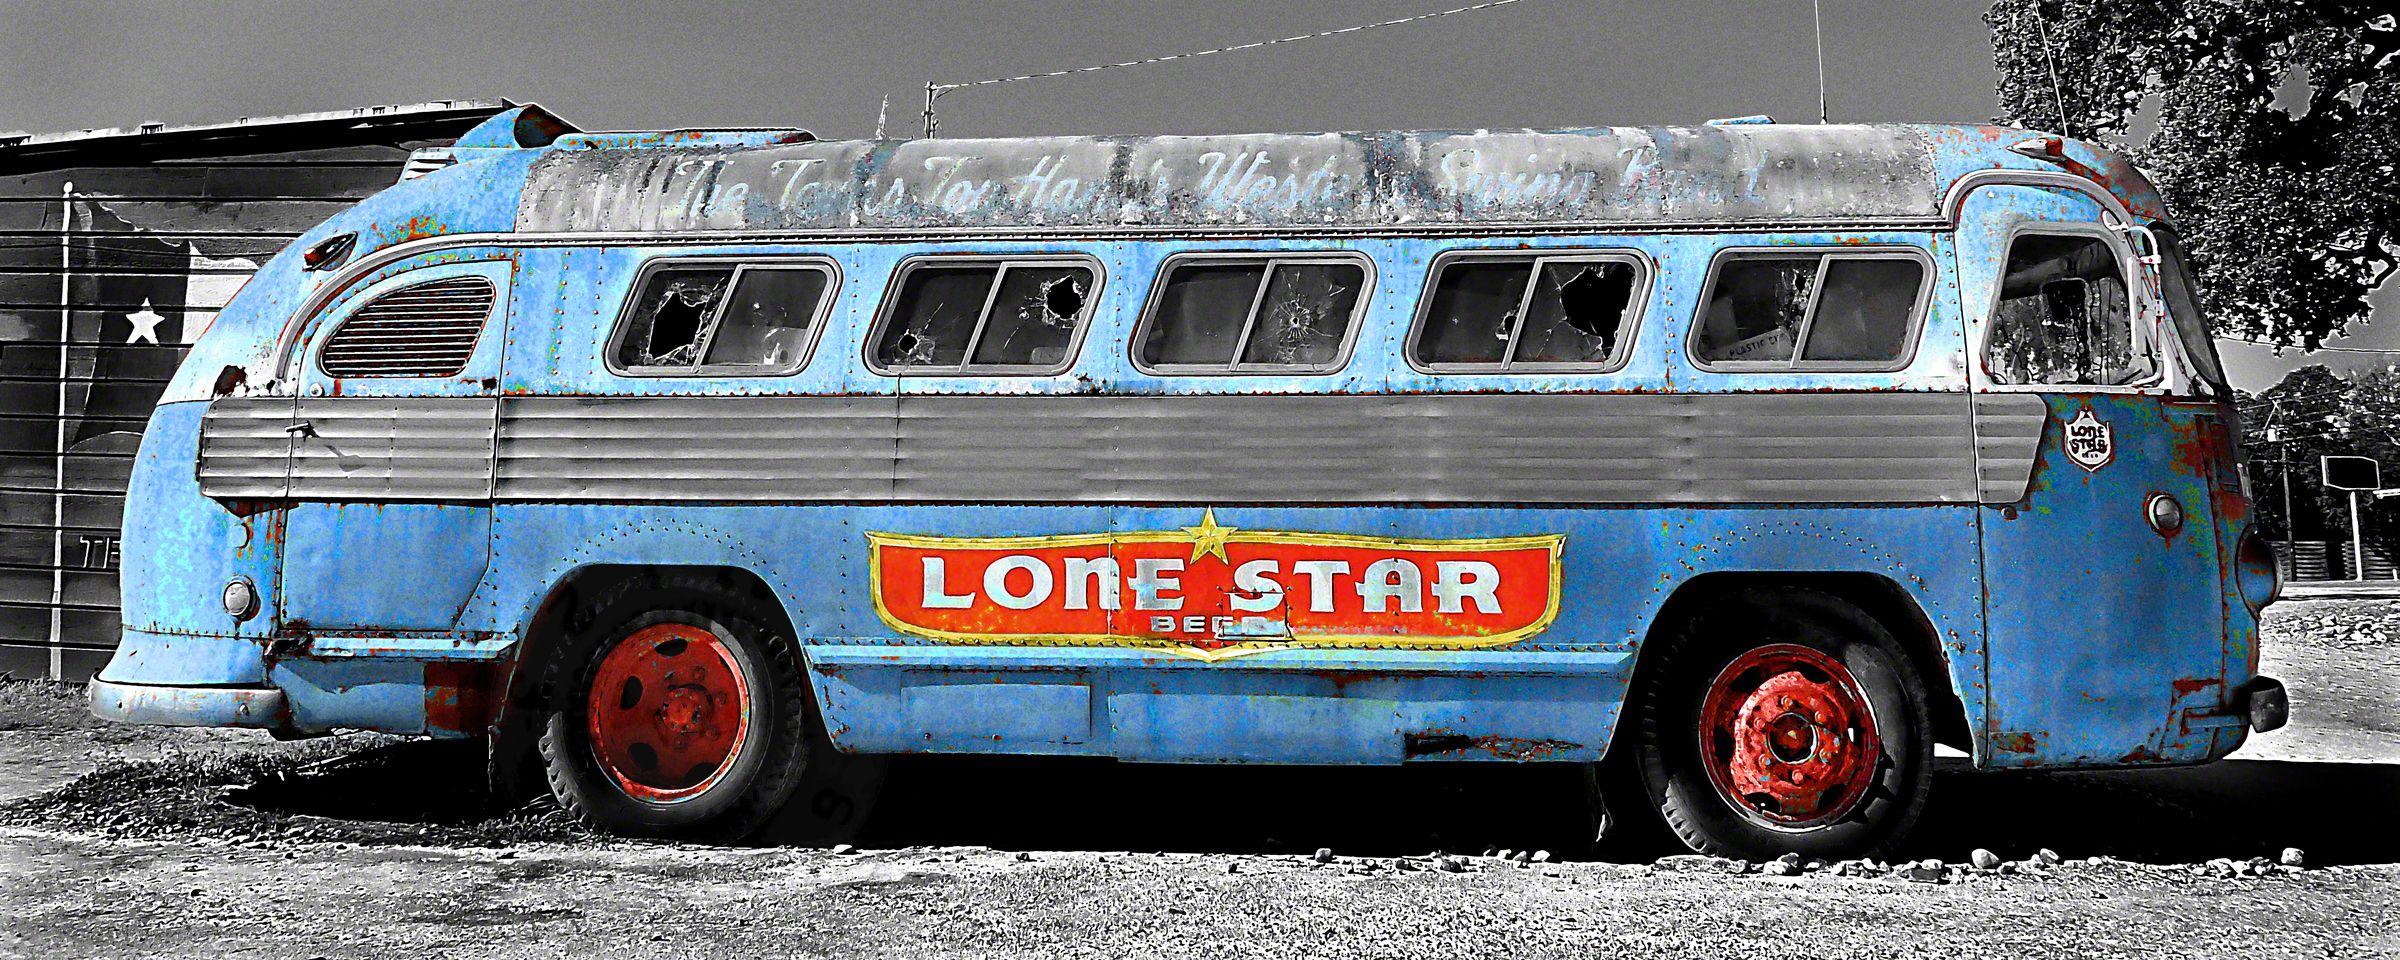 Lone star bus - blue, Photograph, Archival Ink Jet